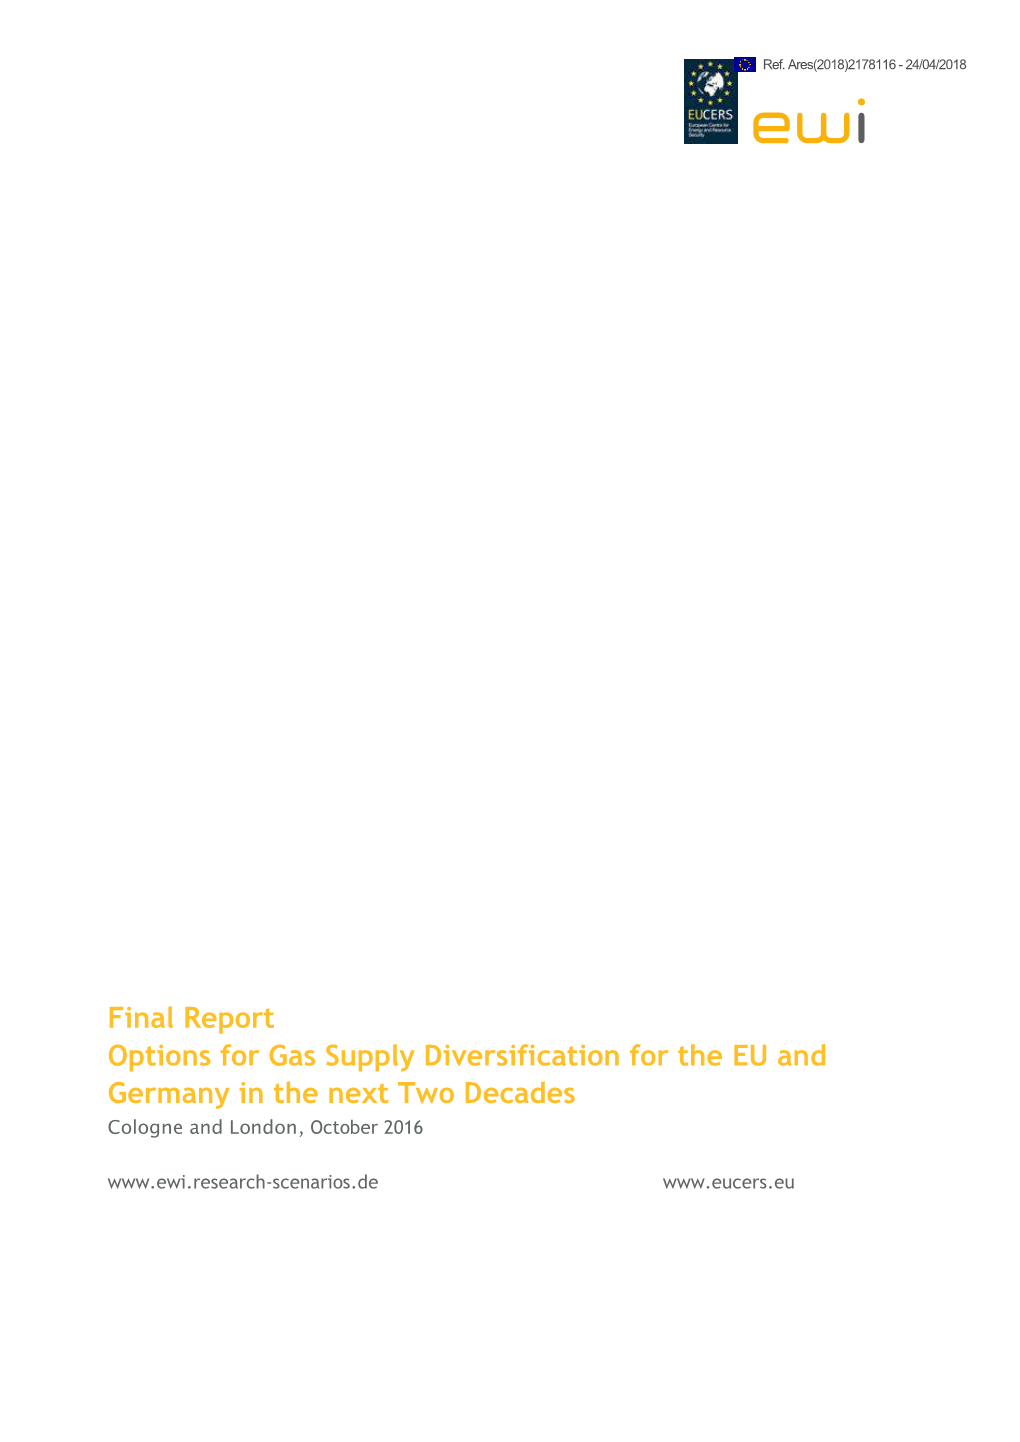 Final Report Options for Gas Supply Diversification for the EU and Germany in the Next Two Decades